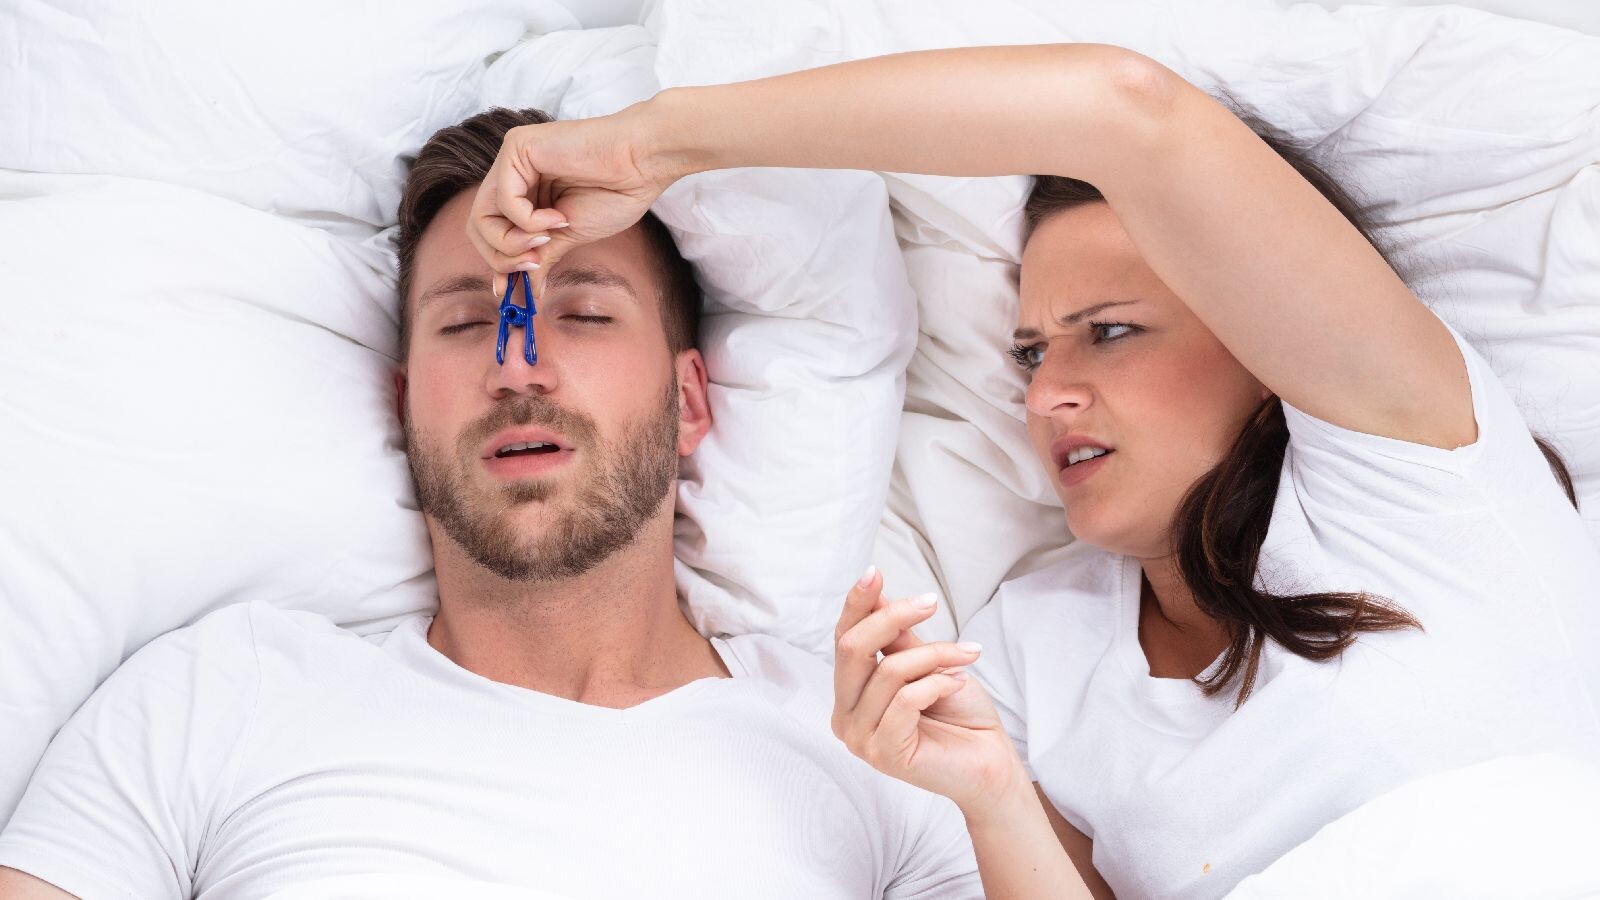 Know how to stop snoring and its treatment options | HealthShots